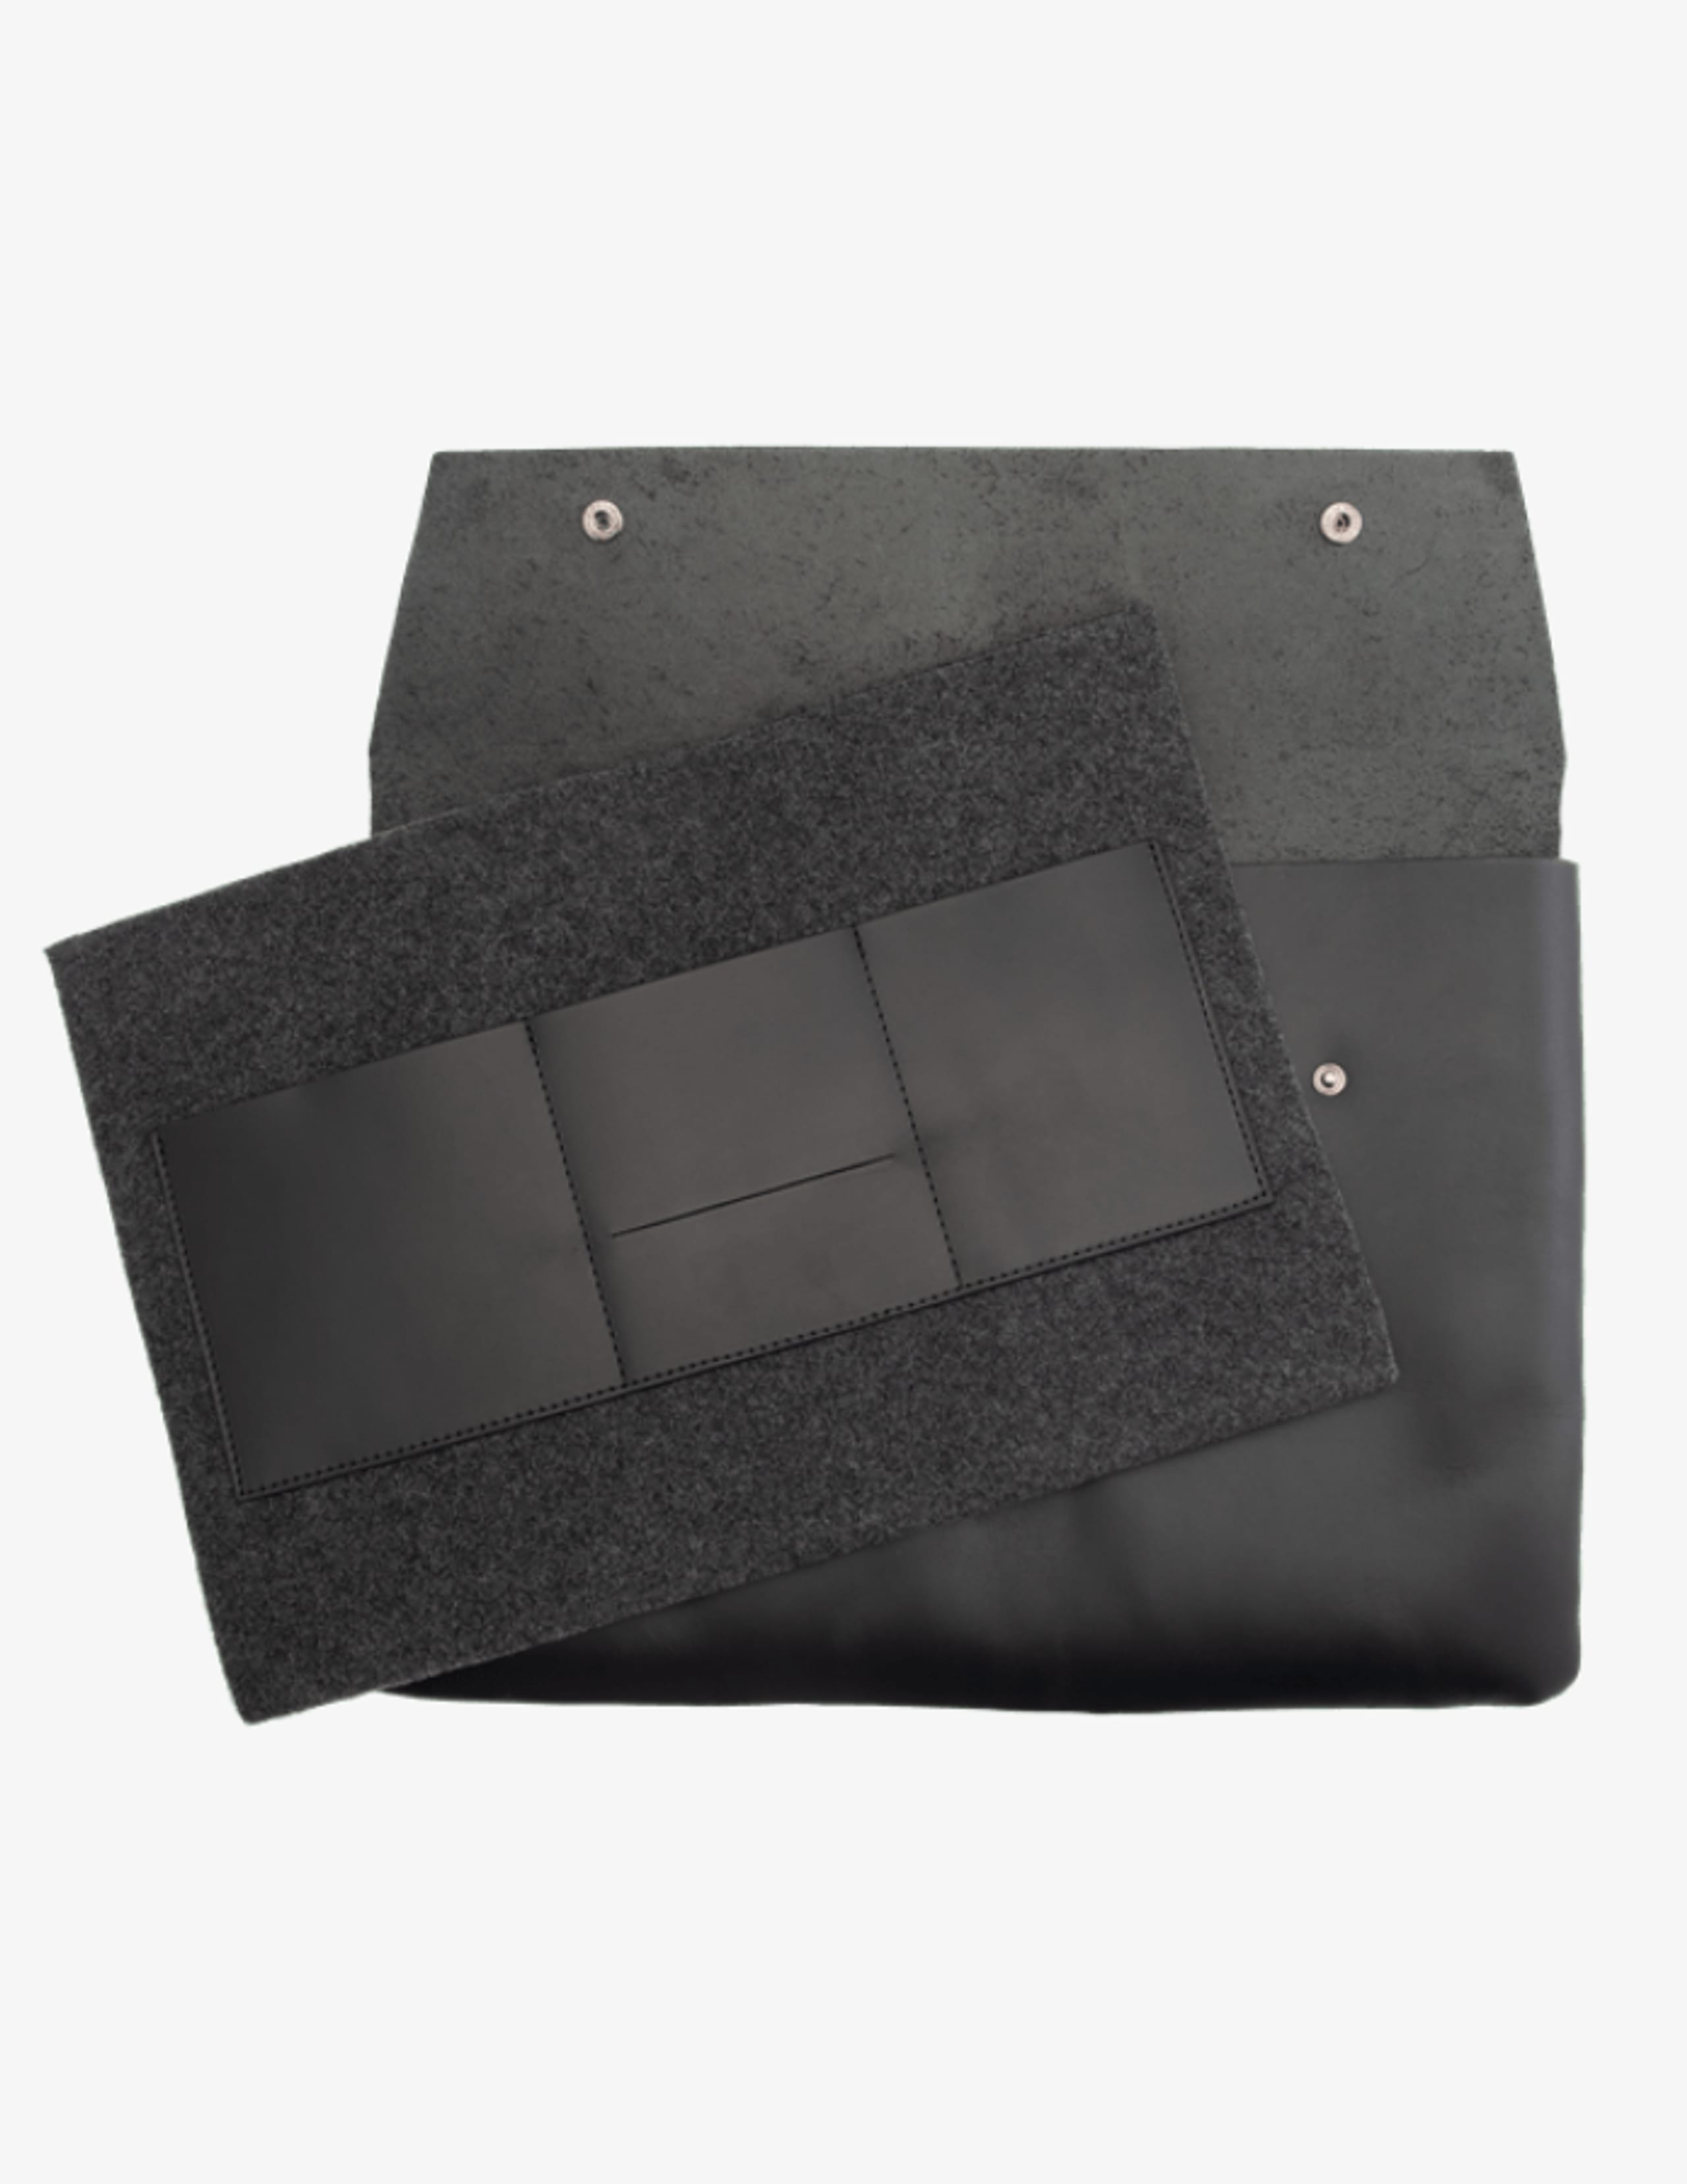 By Wirth - iPad Cover - Carry My Laptop - Black